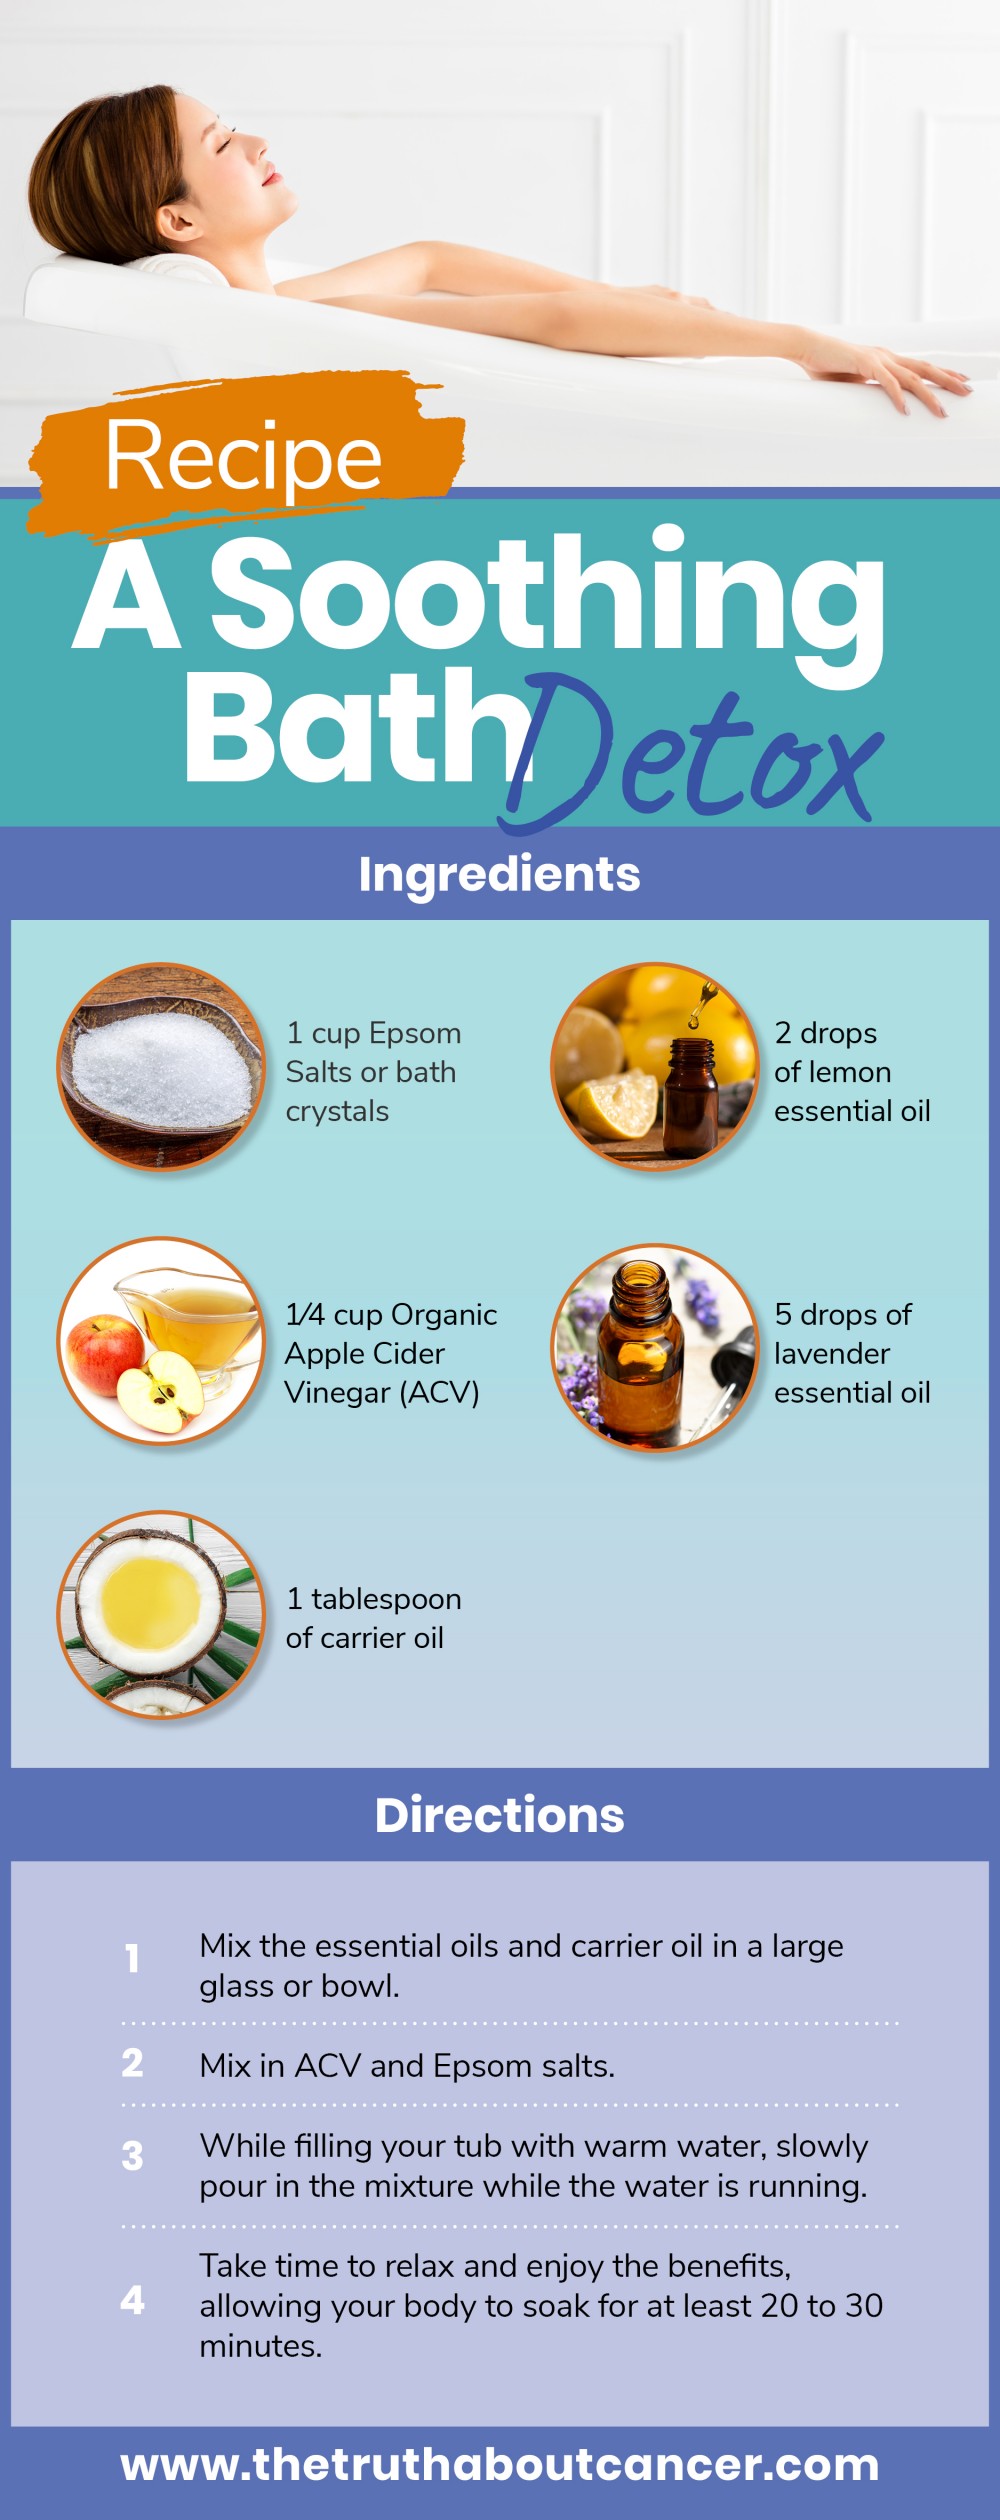 soothing bath detox recipe infographic